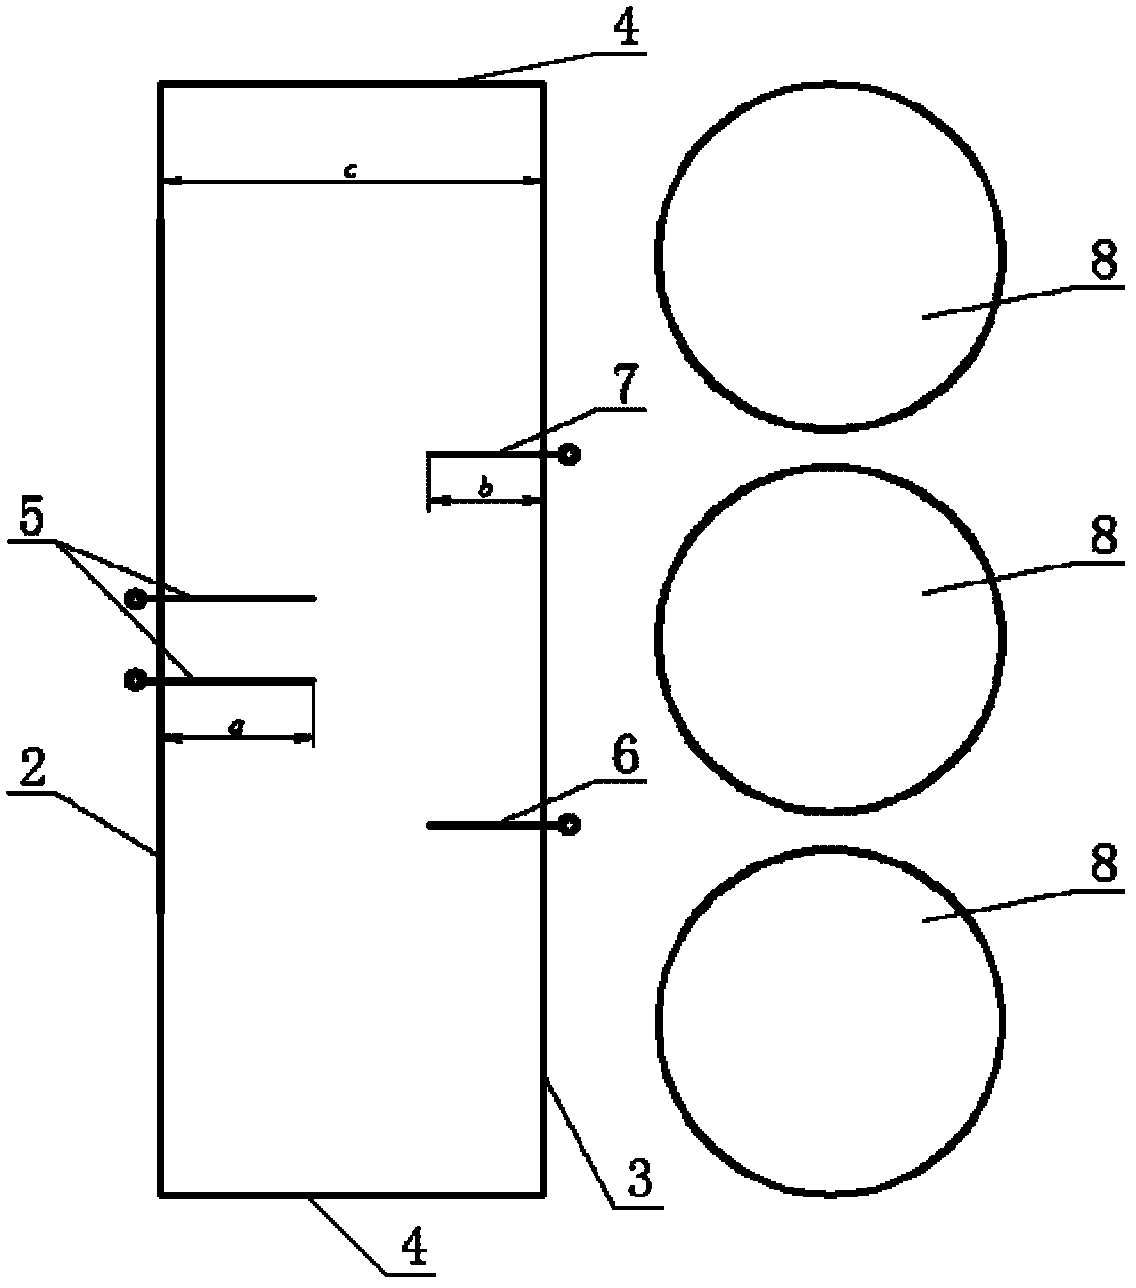 Hearth structure of circulating fluidized bed boiler of 3rd-stage cyclone separator